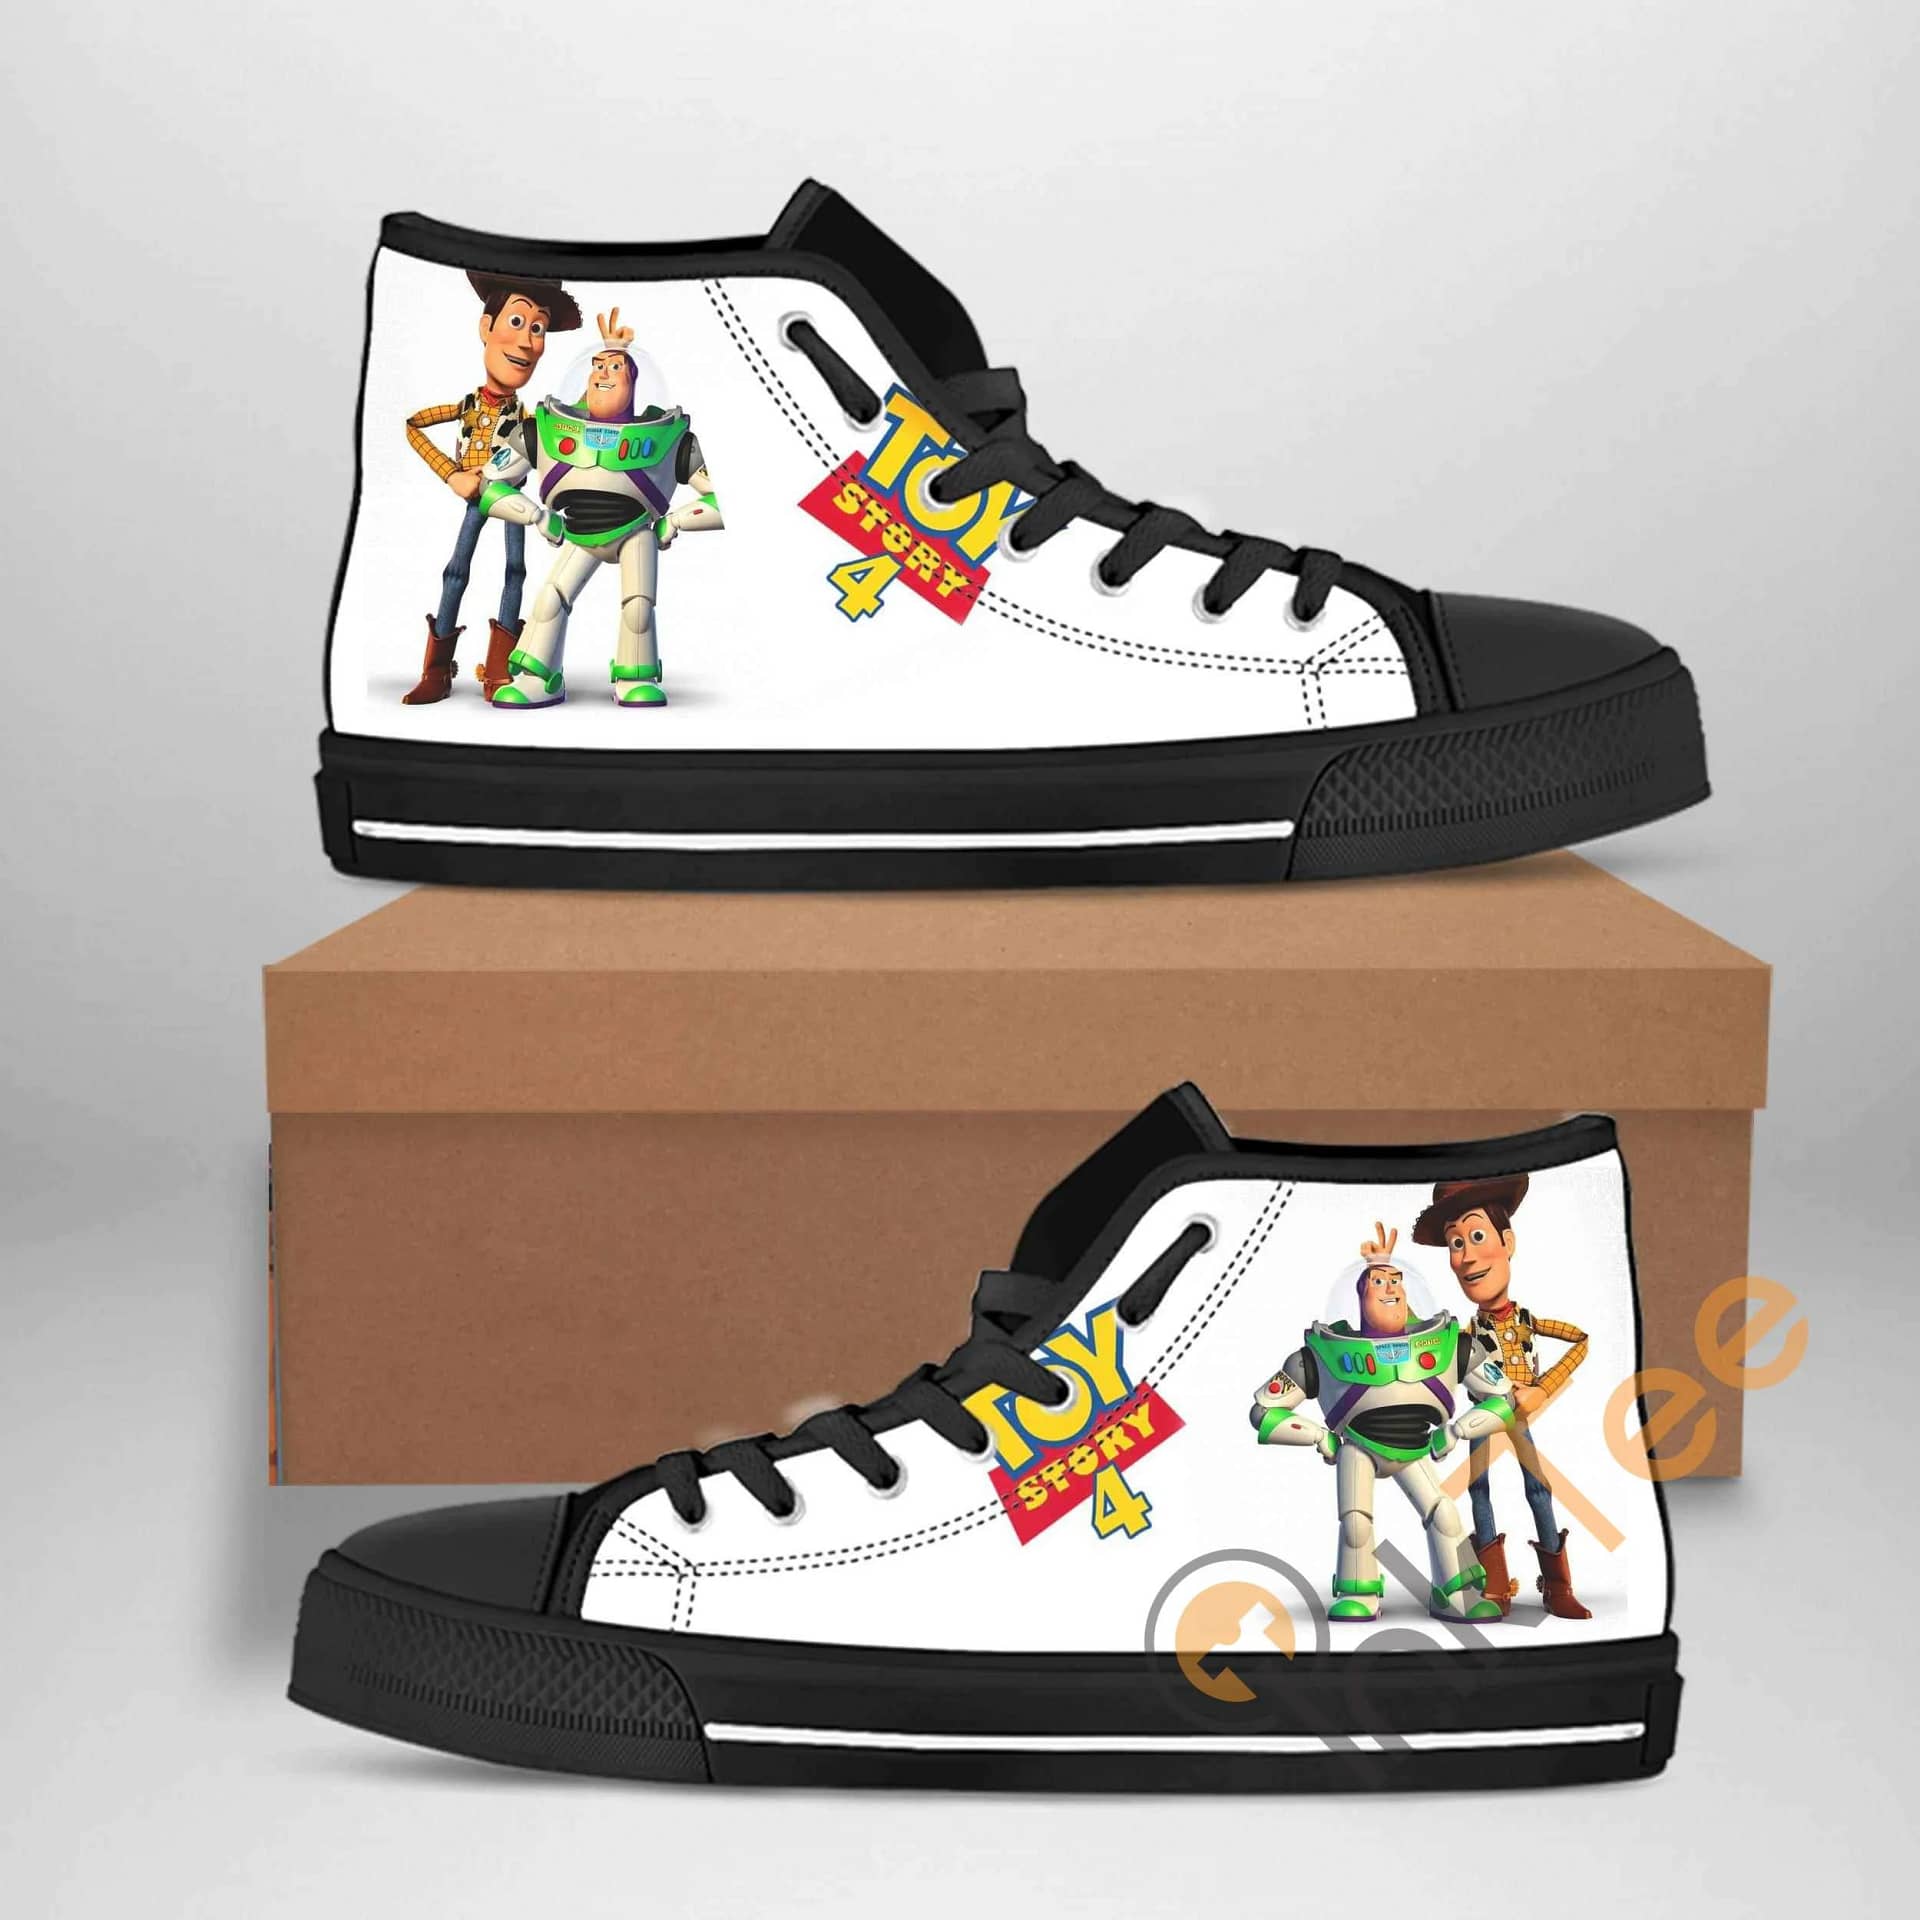 Buzz Lightyear Best Movie Character Amazon Best Seller Sku 1353 High Top Shoes